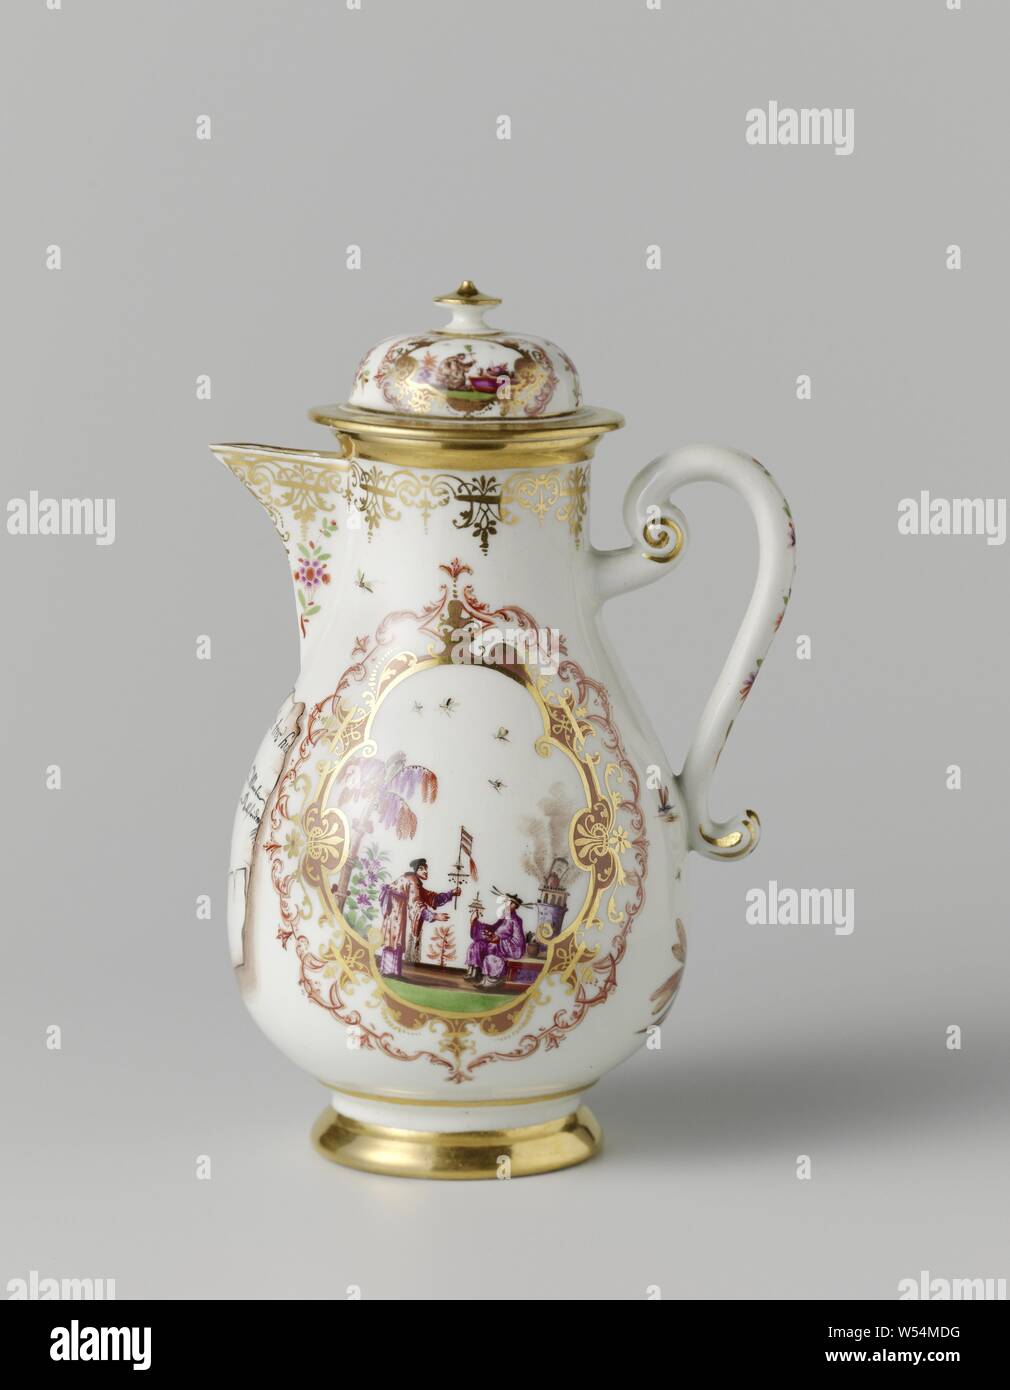 Coffee pot with lid, multicolored painted with chinoiseries and a trompe l'oeuil, Coffee pot made of painted porcelain. The ear is C-shaped and the foot, mouth and spout are gilded. The jug is adorned on both sides on body and lid with a four-pass inside which a Höroldt chinoiserie. Indian Blumen have been painted between the four steps of the lid and on the ear and spout. Under the spout a letter fragment and trompe l'oeuil with the text: 'Votre très hu [mble] Johann Martin Bottfridm ... nebst 1. Balln mit dem Sigl: CZ zur Fracht ge ... 6 Fev'. The jug is not marked., Meissener Porzellan Stock Photo